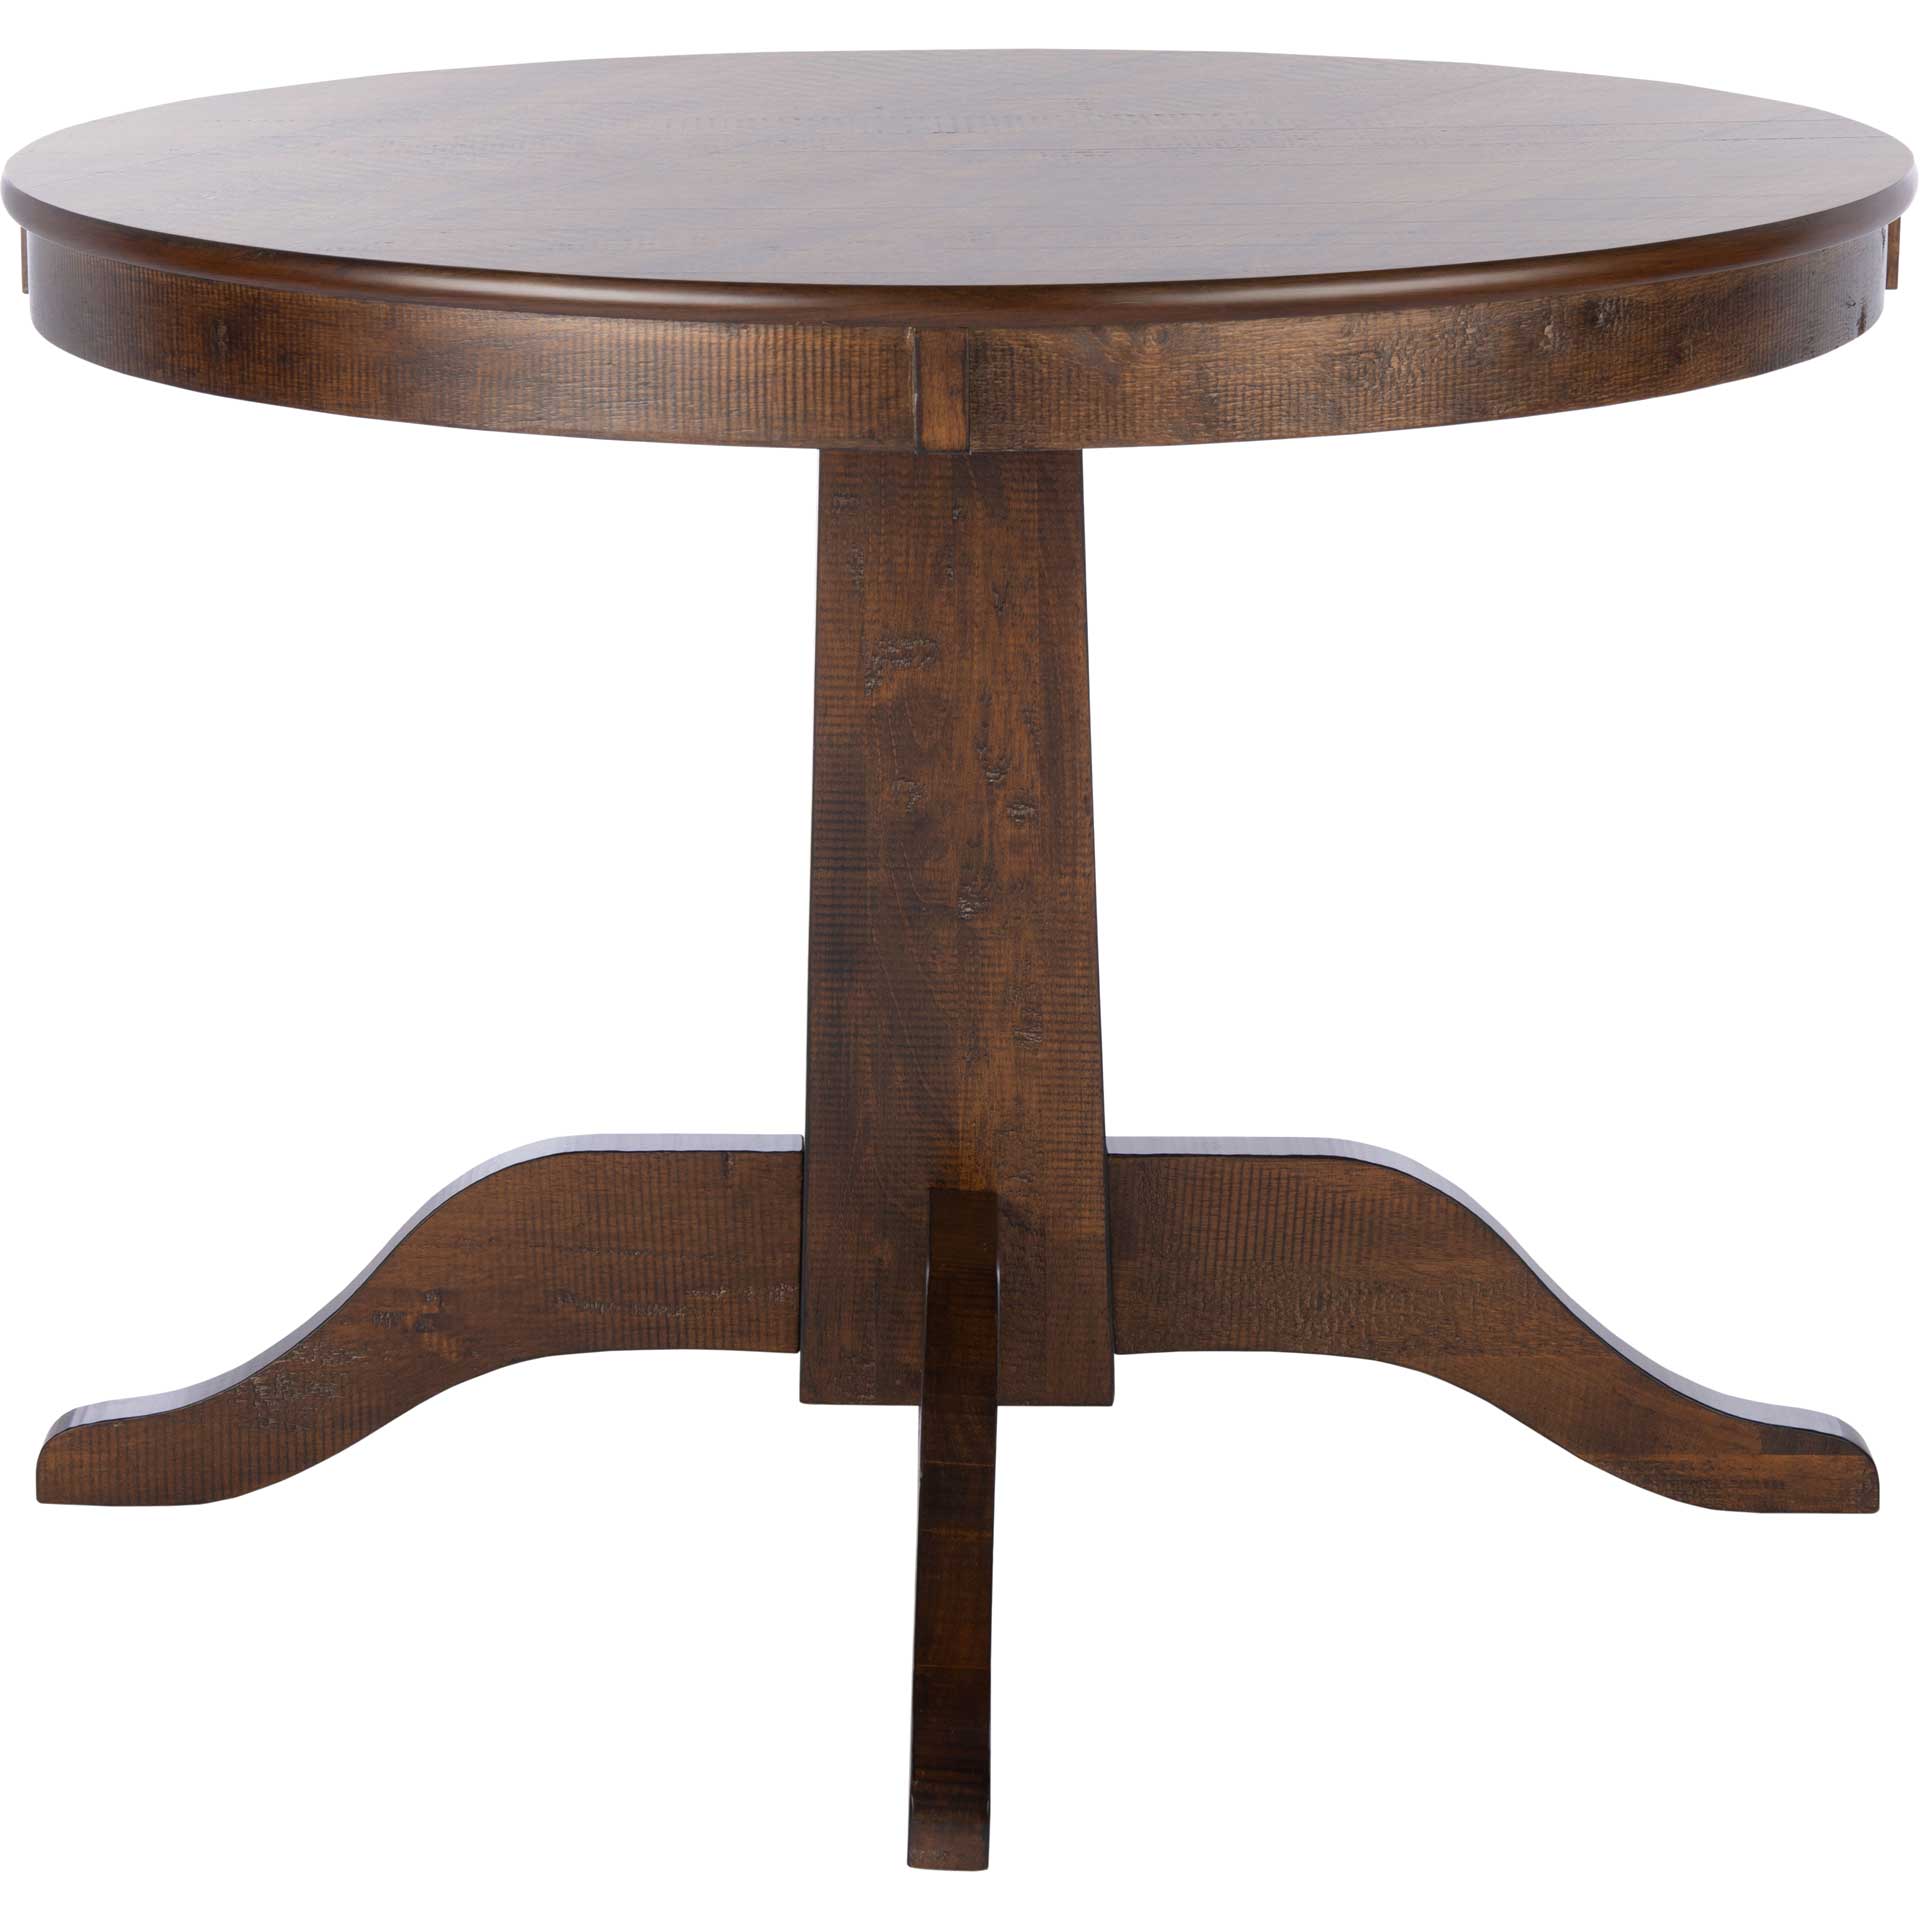 Sebastian Round Dining Table Rustic Cafe